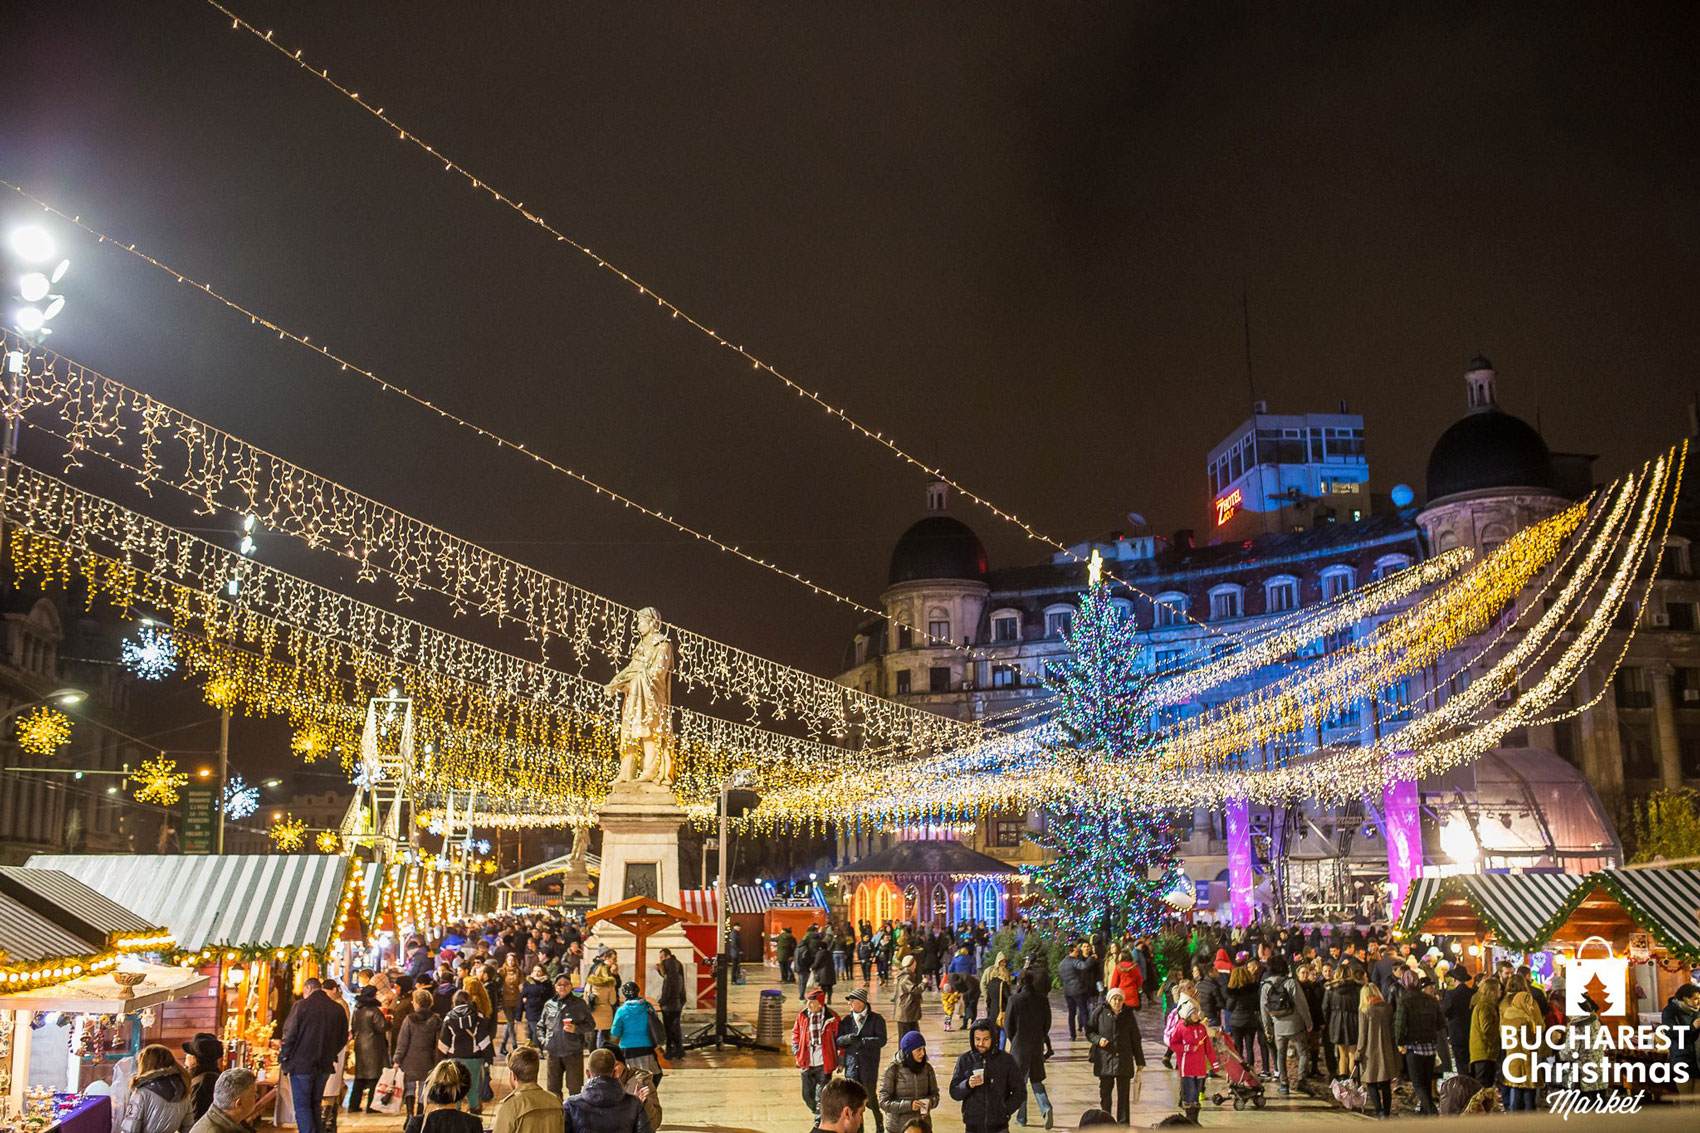 Bucharest Christmas Market - Live Concerts, Magical Lights, and Age ...